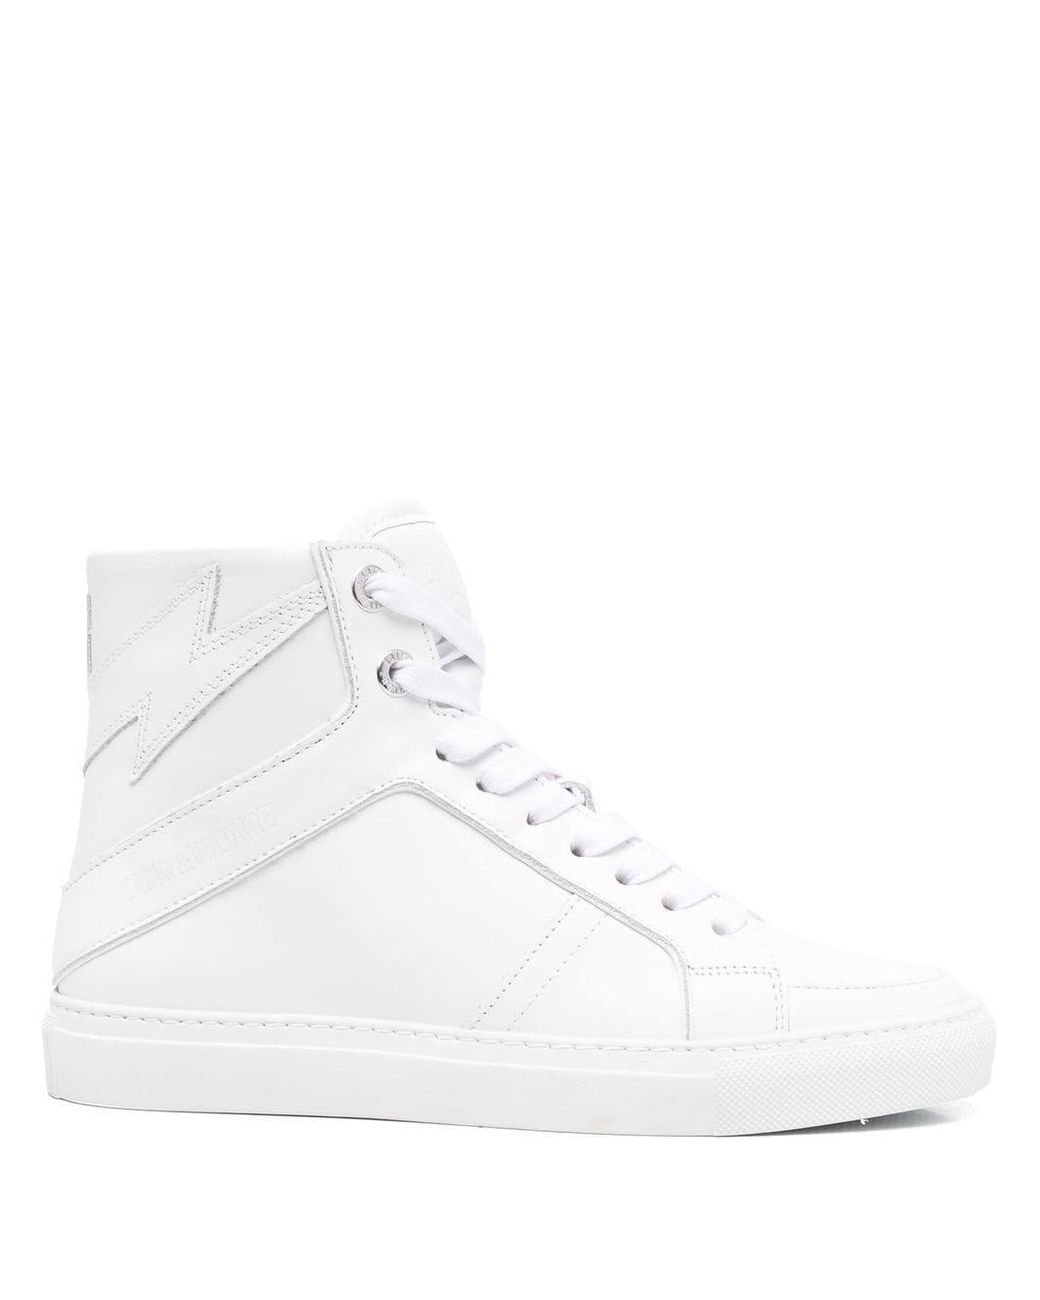 Zadig & Voltaire Flash High-top Leather Sneakers in White | Lyst